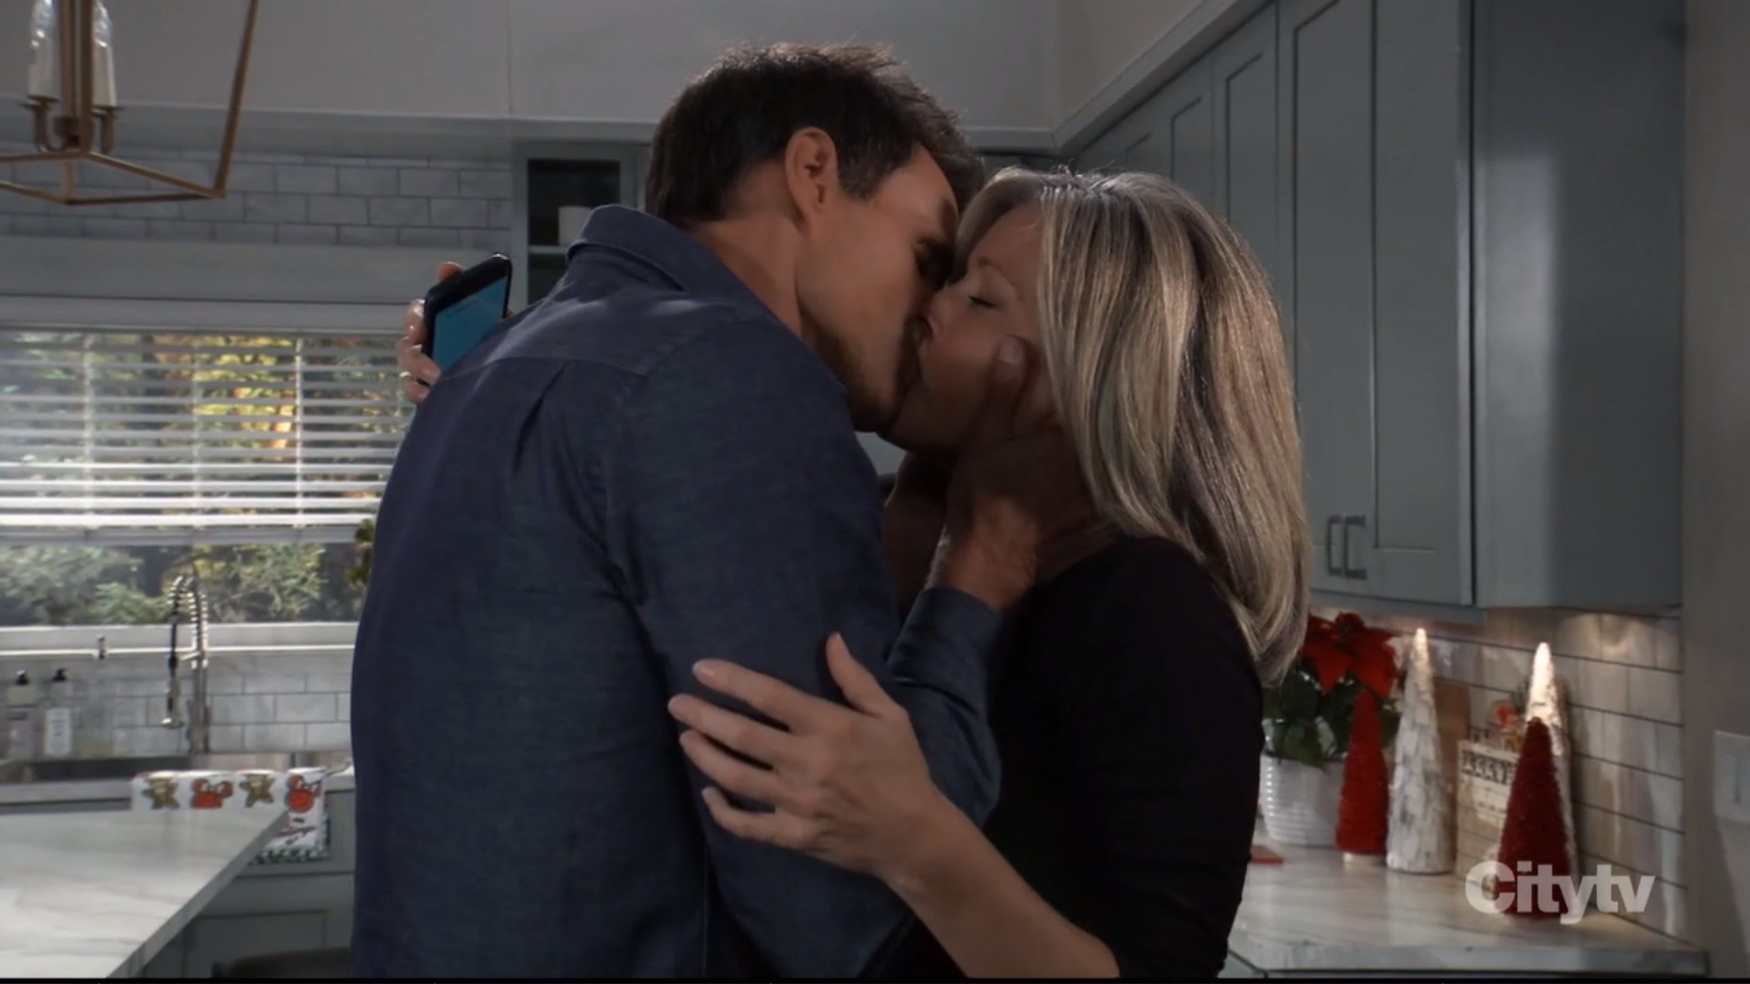 drew kissing carly at home GH recaps soapsspoilers